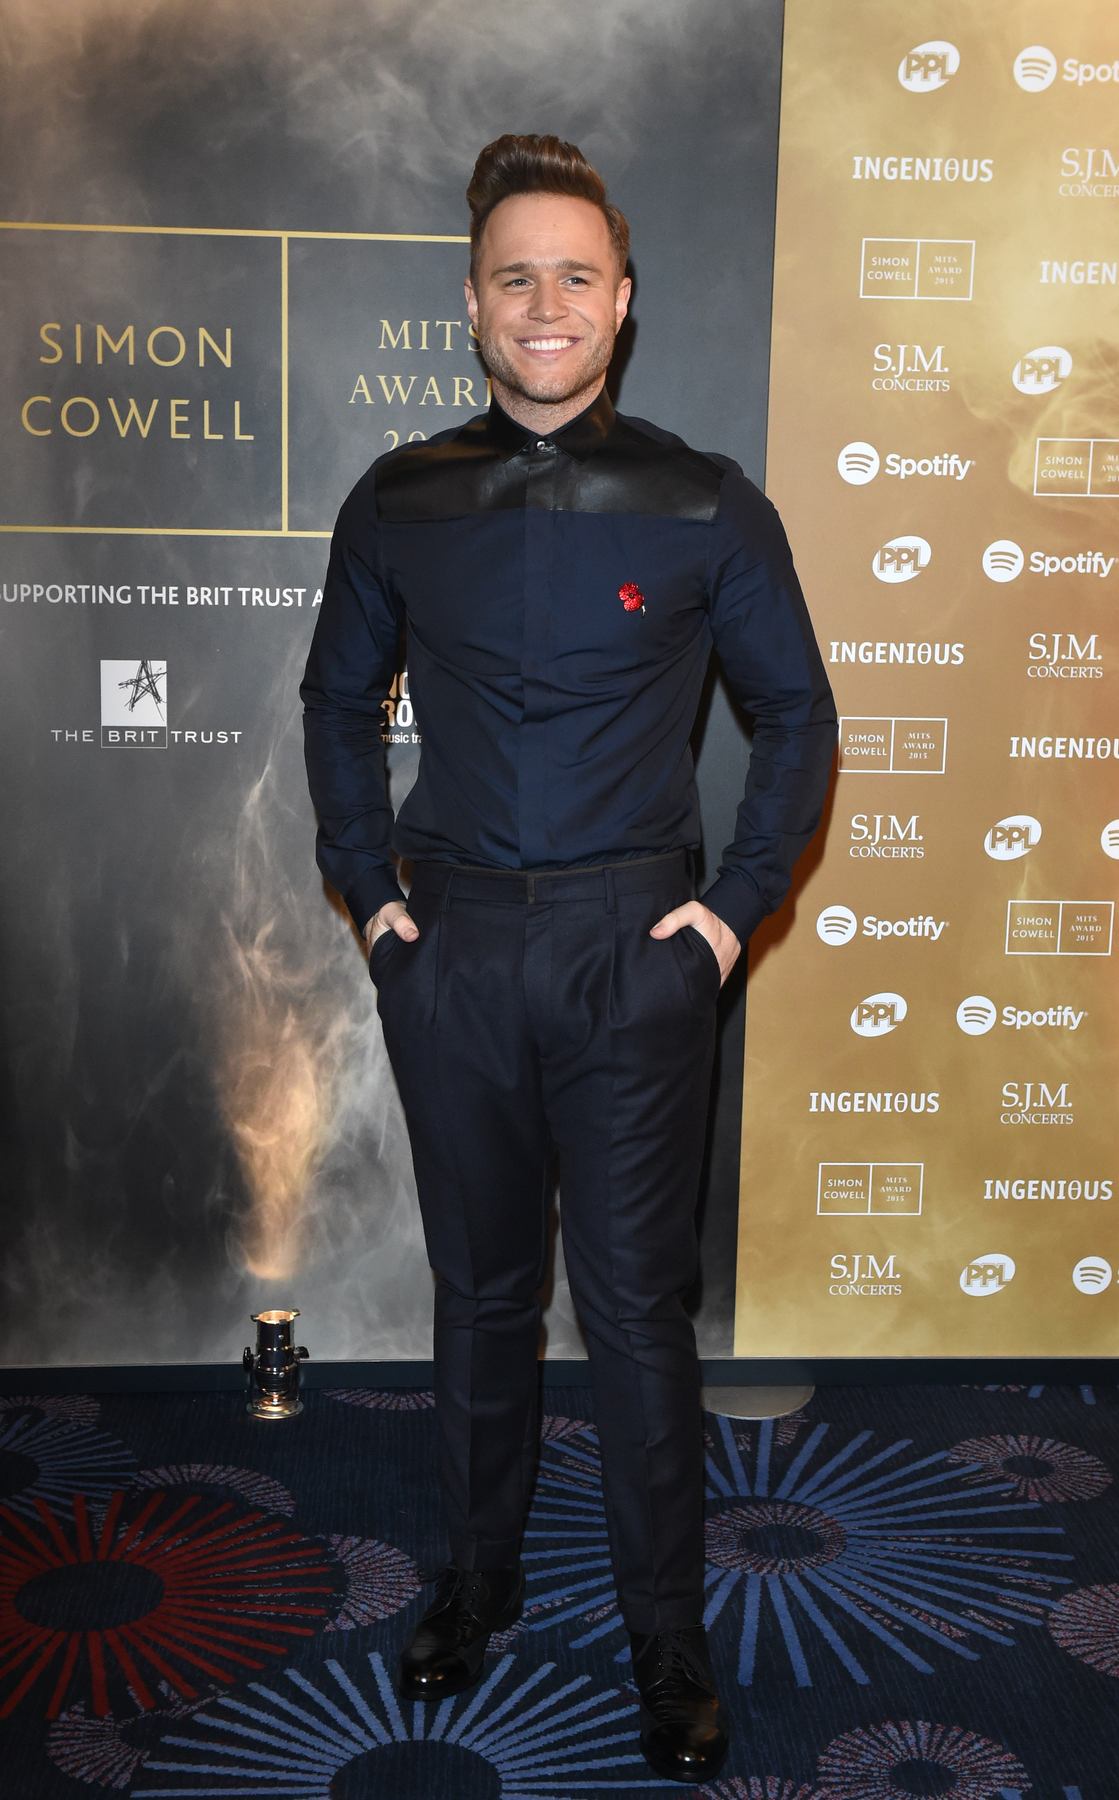 Caroline Flack and Olly Murs at Music Industry Trusts Award Event